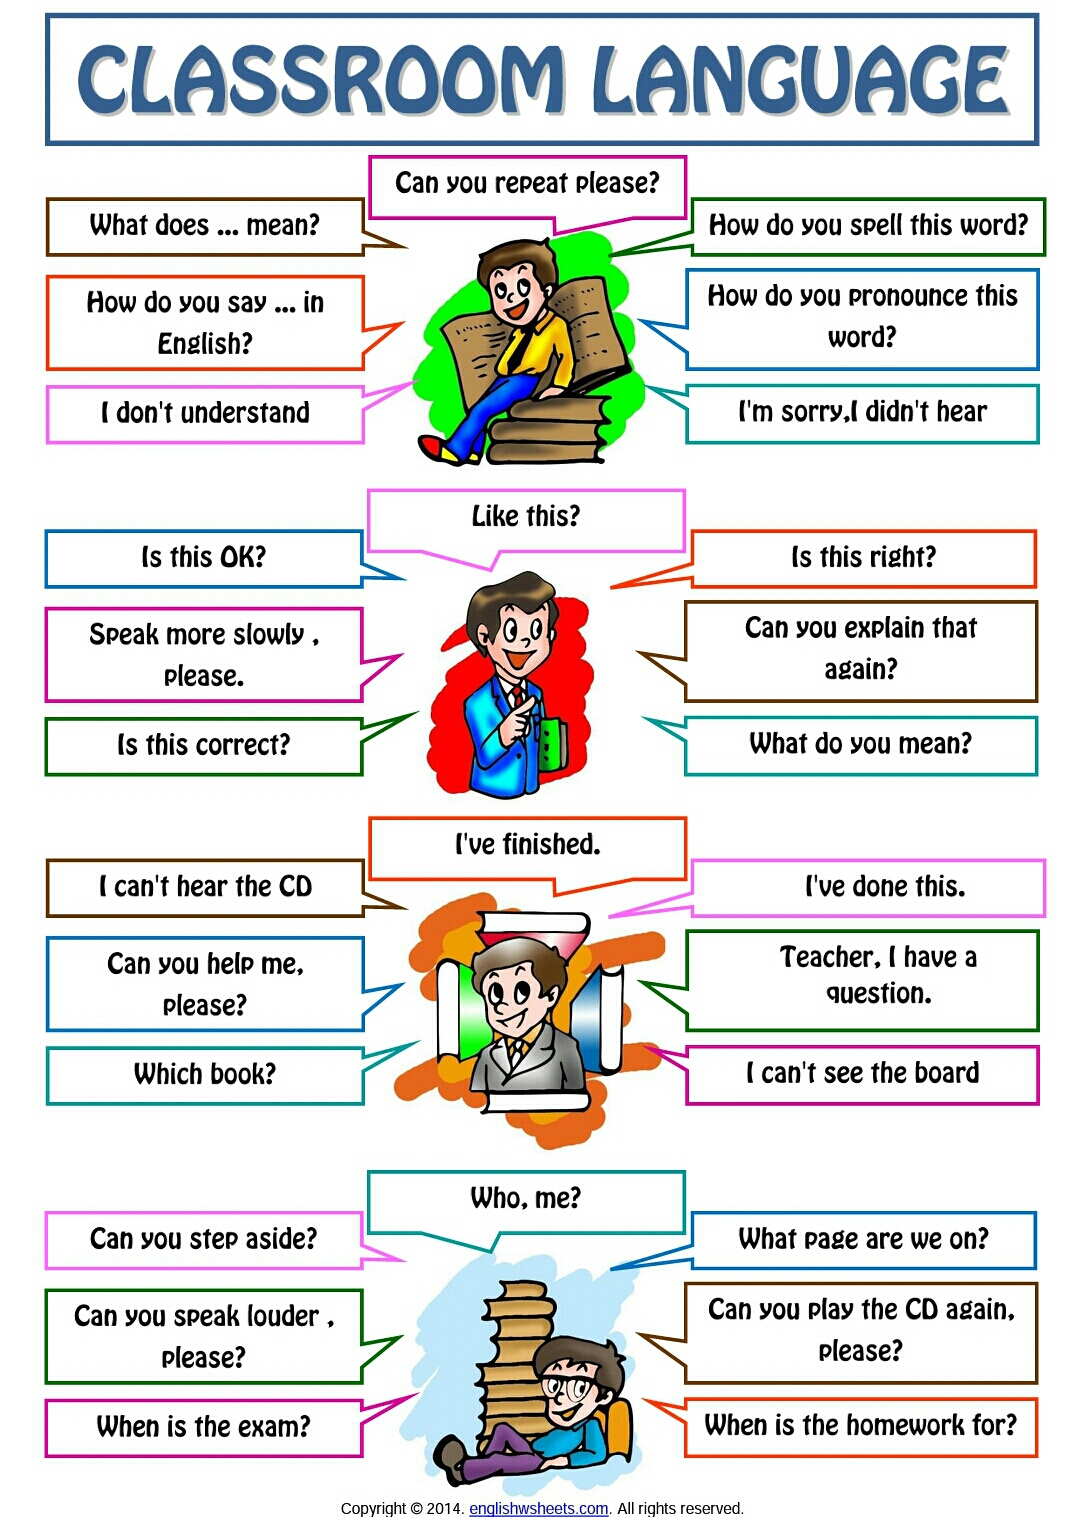 classroom-language-for-students-poster-worksheet